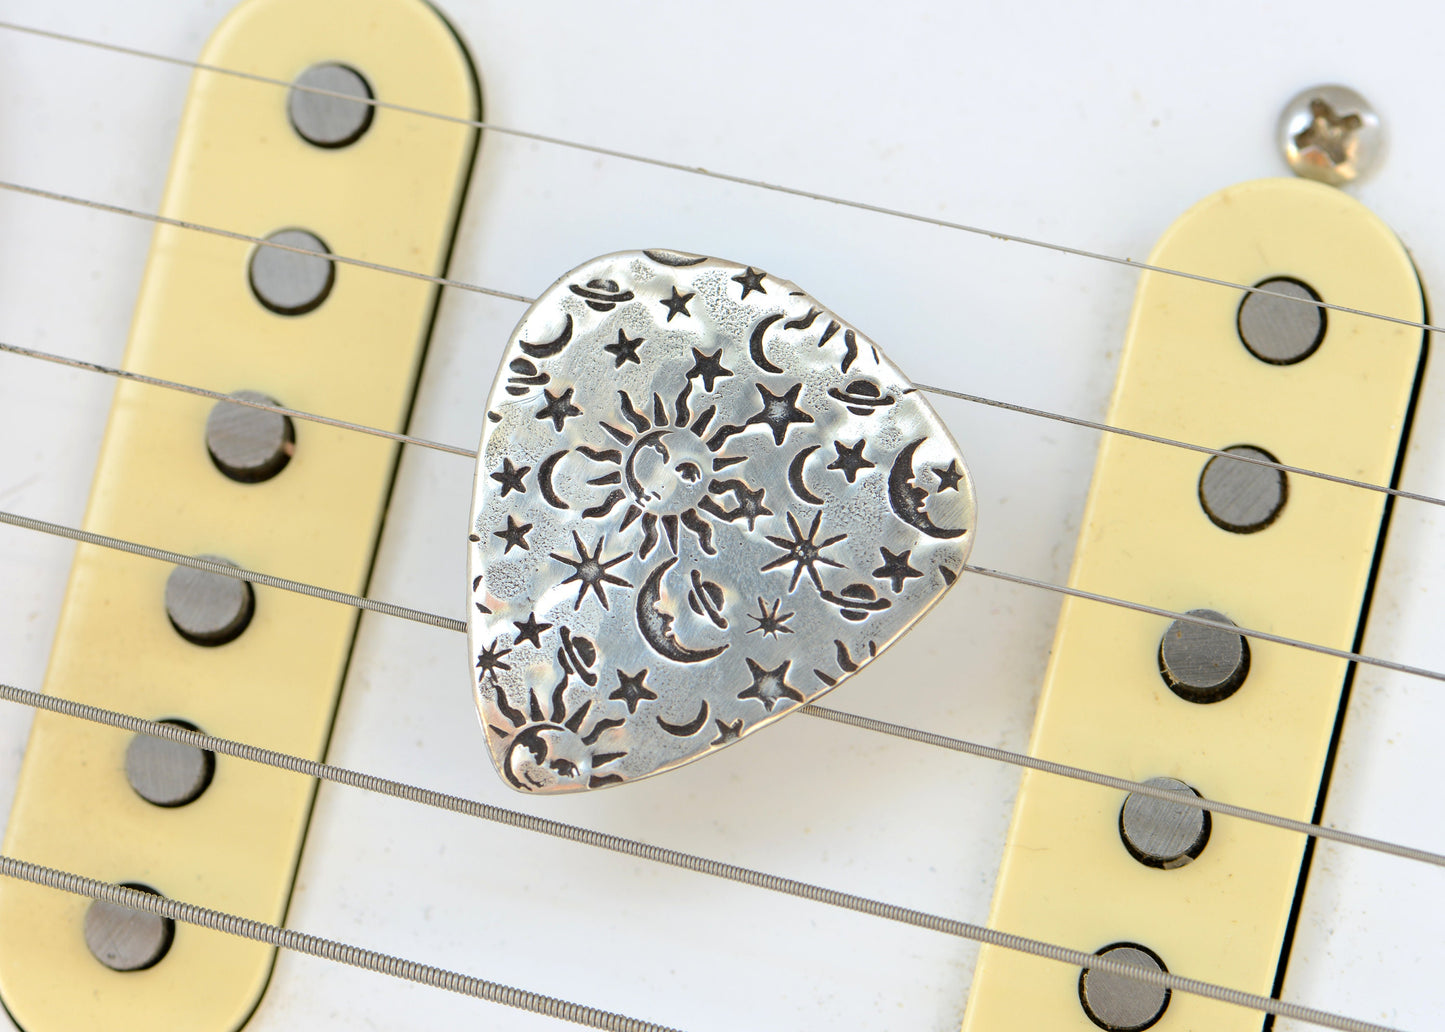 Guitar Pick in Sterling Silver imprinted with Sun Stars and Moon